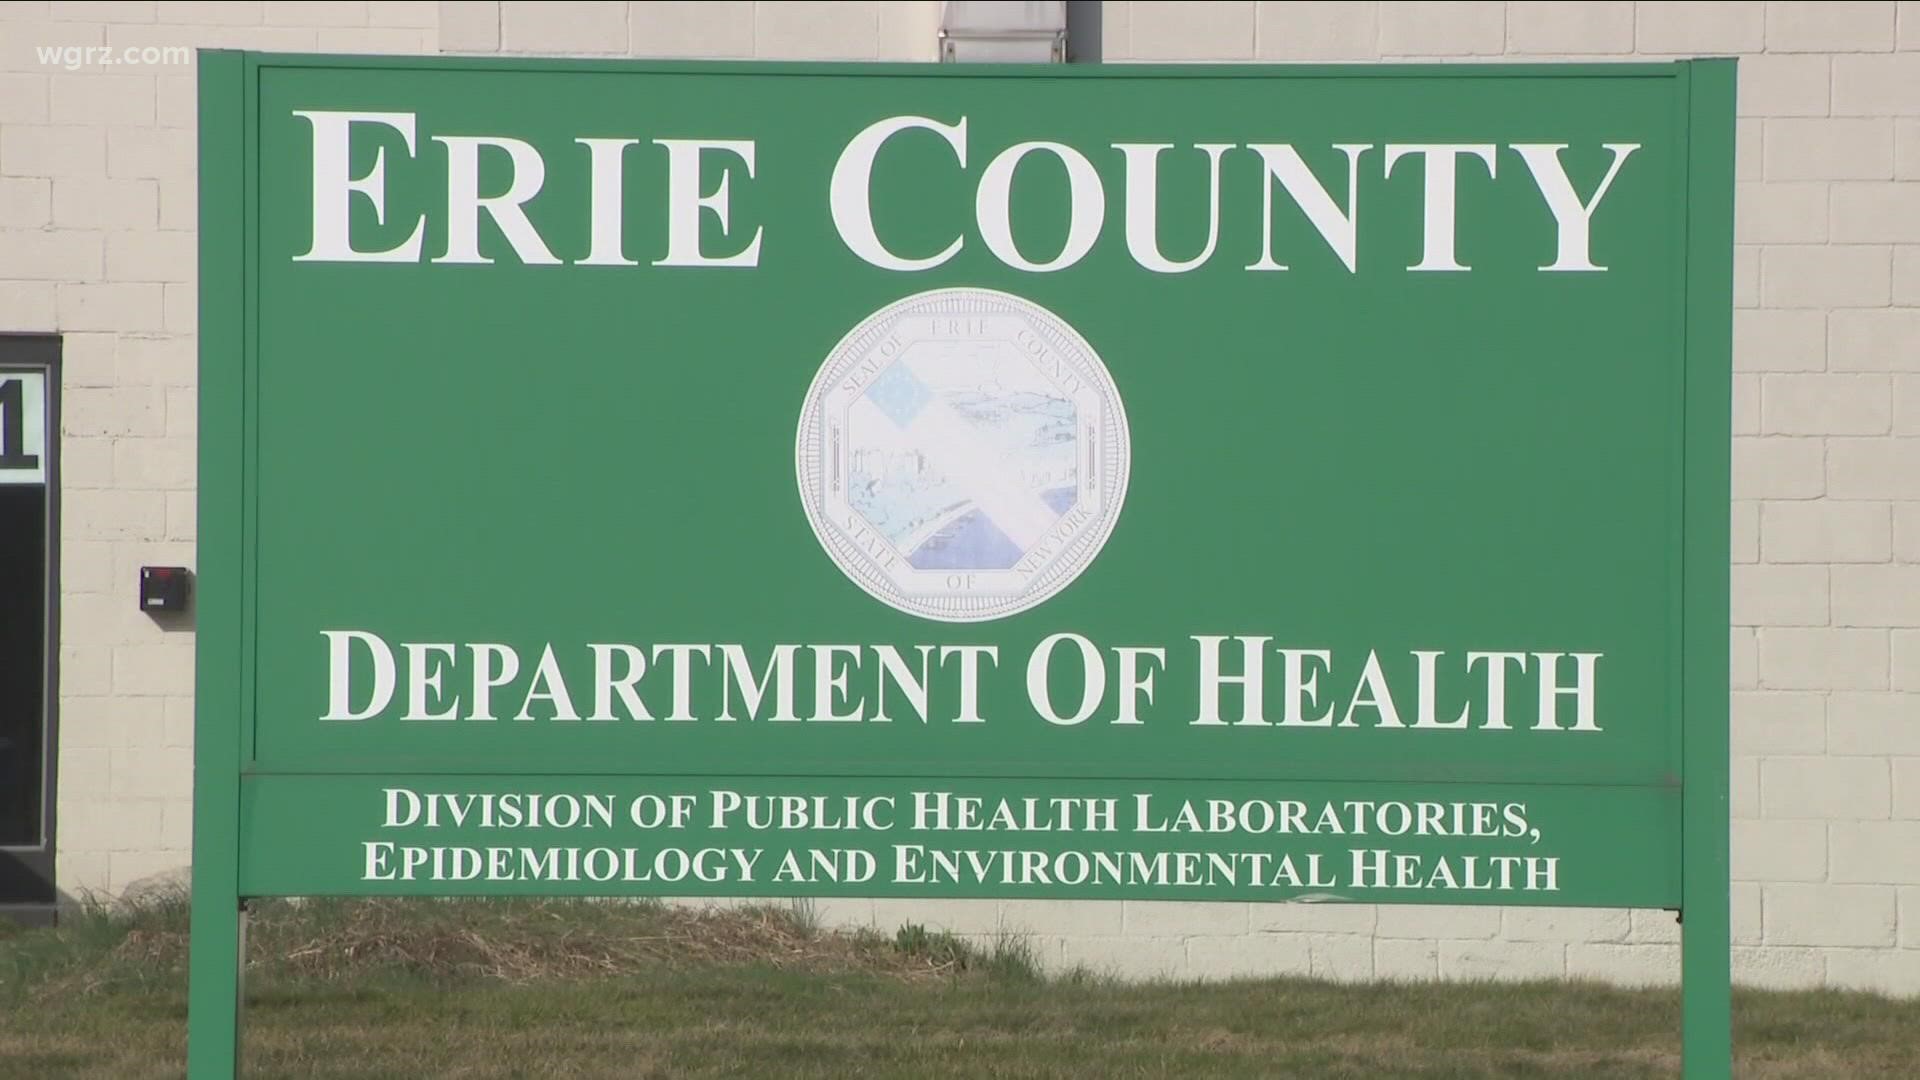 Following a steady decline in calls, the Erie County Department of Health announced Wednesday that the COVID-19 hotline is closing down.